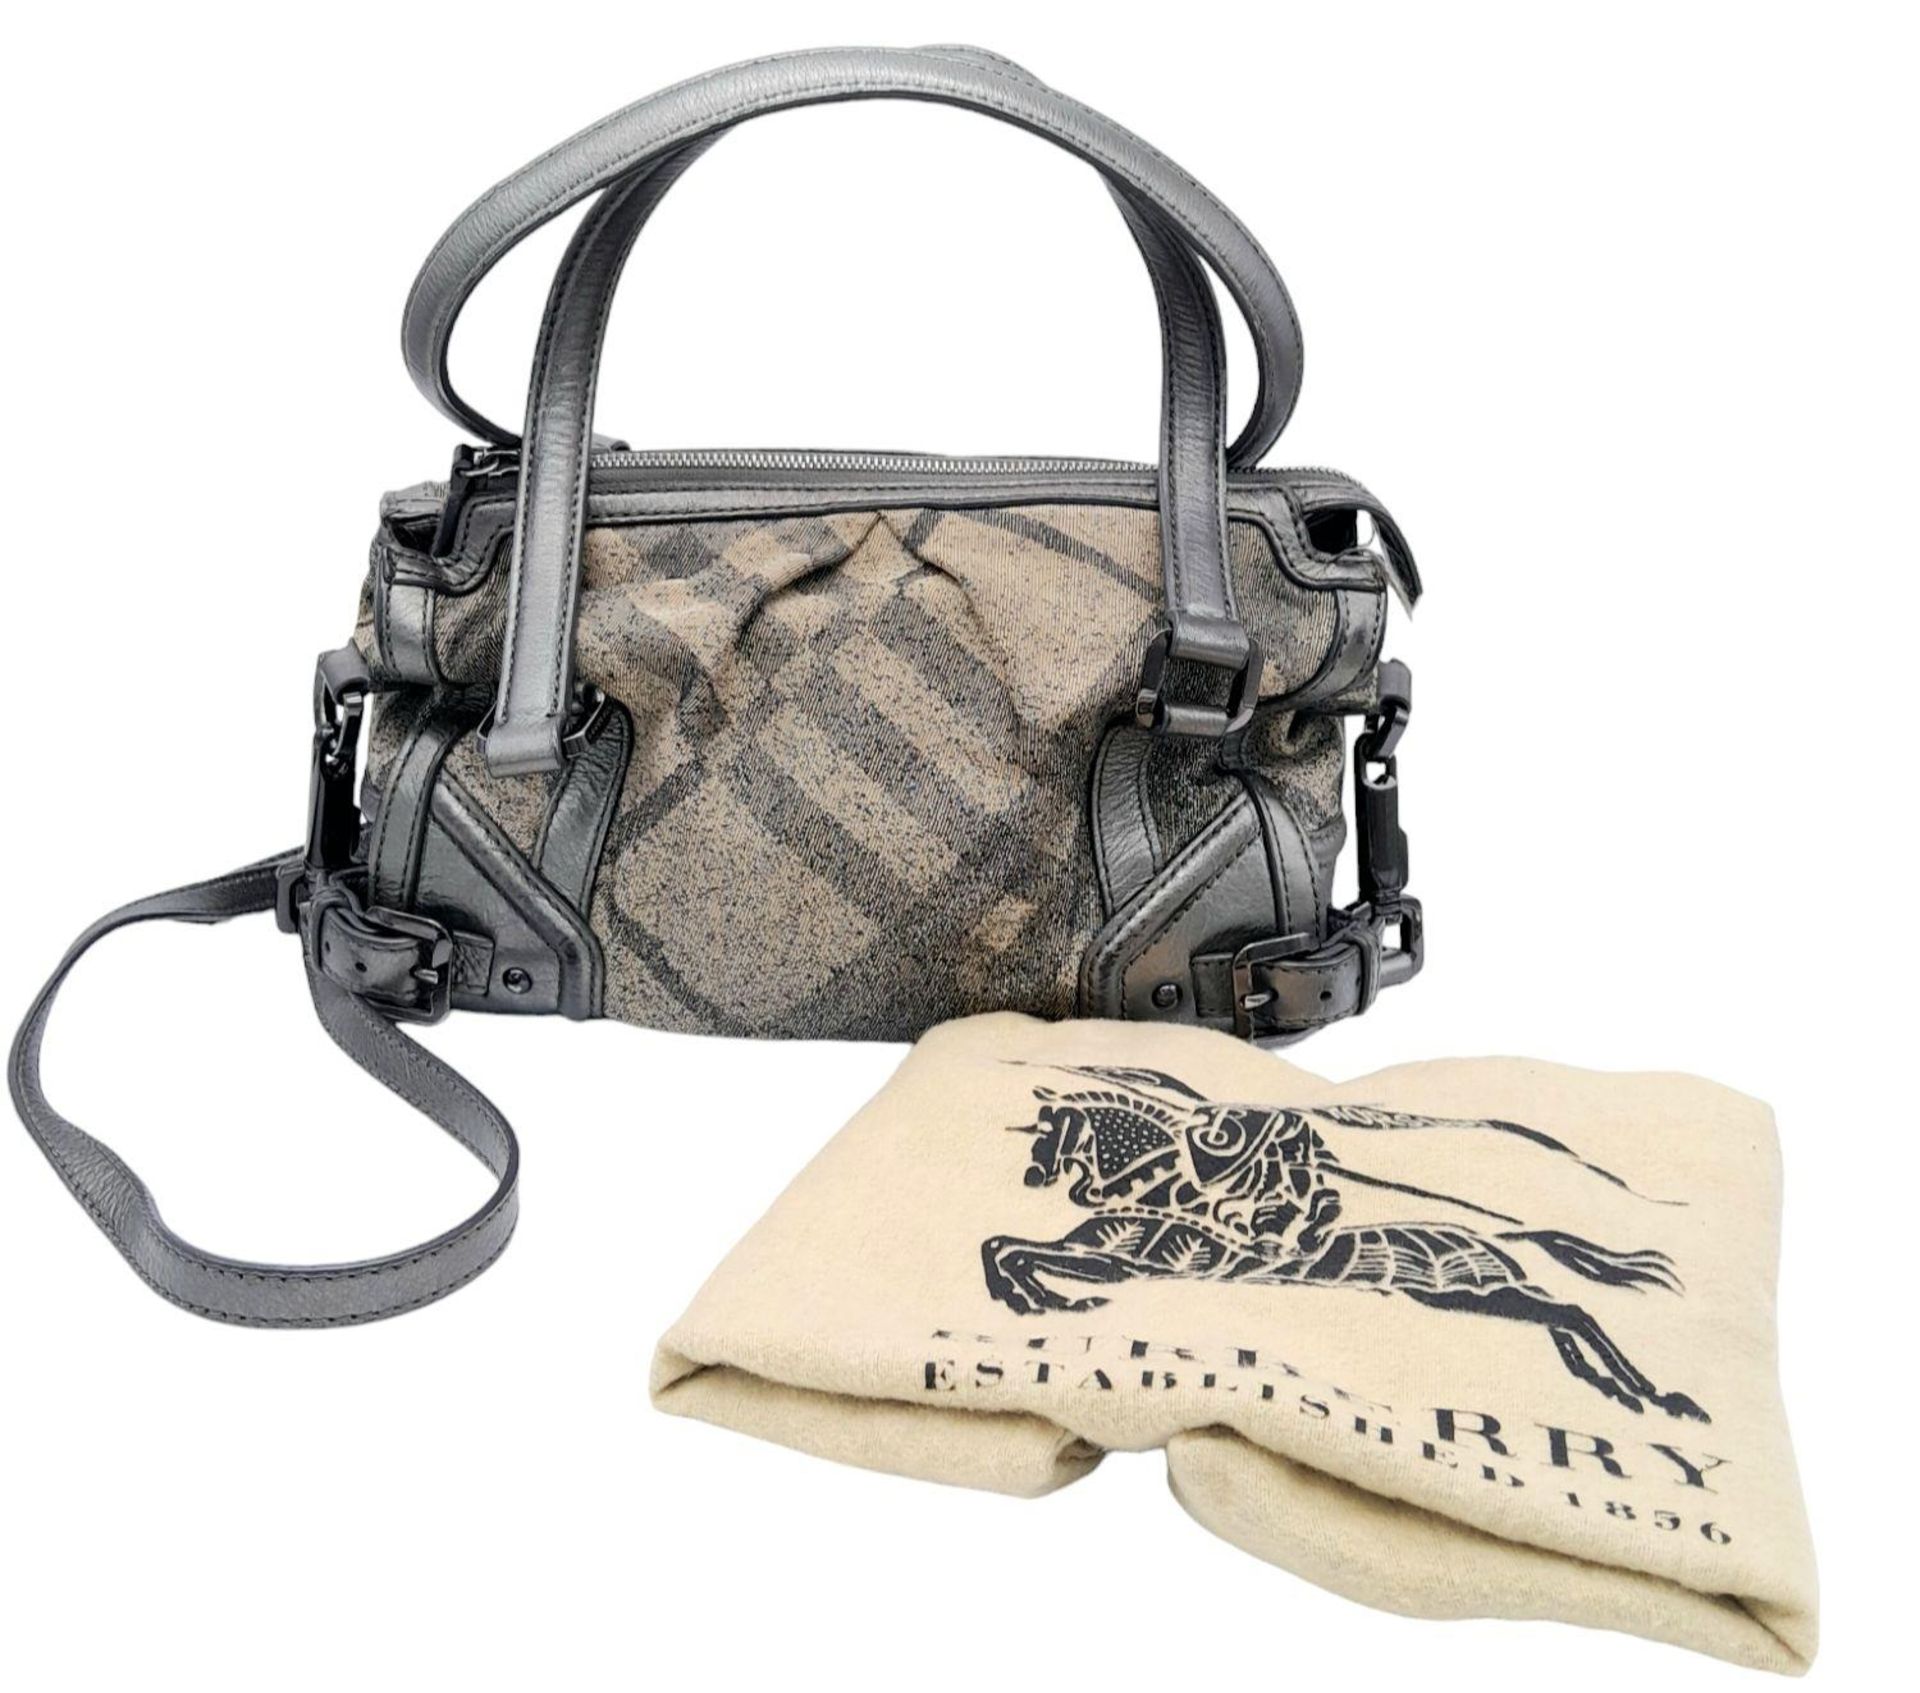 A Burberry Metallic Grey Smoke Check Bag. Canvas exterior with leather trim, leather straps, black- - Image 3 of 9